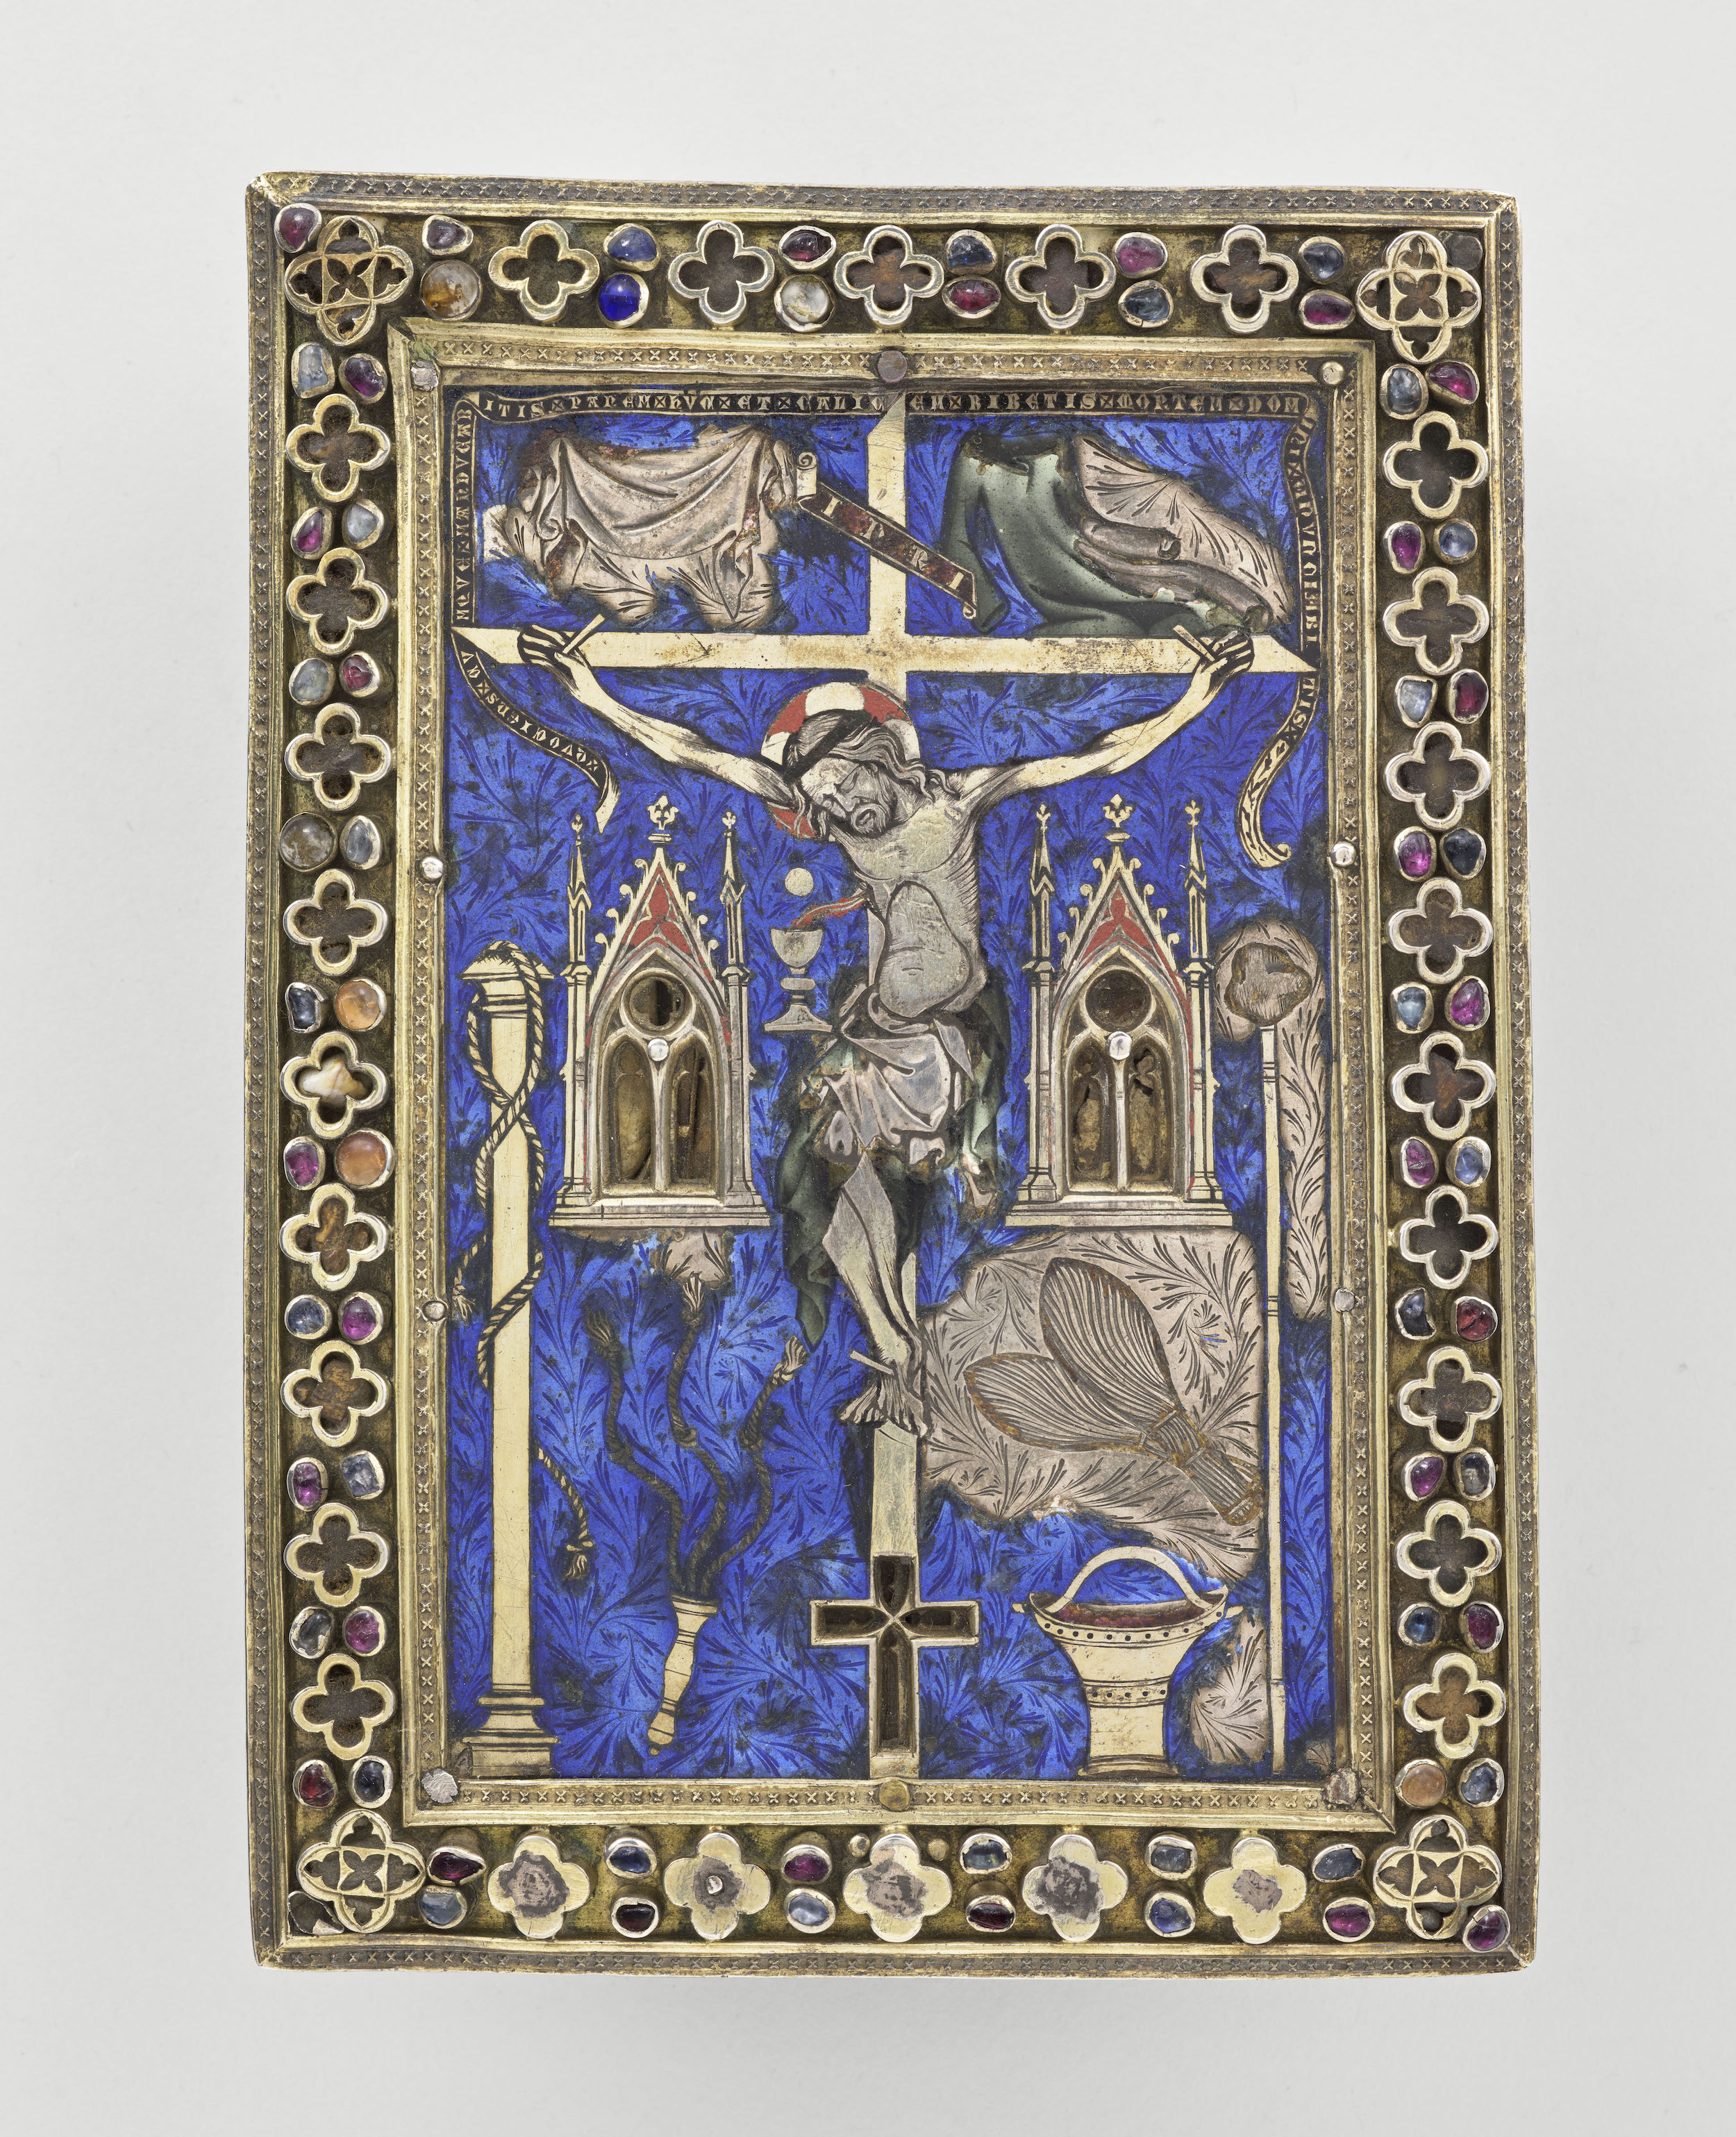 Painting-reliquary with a Crucifixion by Unknown Artist - 15th Century - 17.5 x 12.8 cm Musée de Cluny